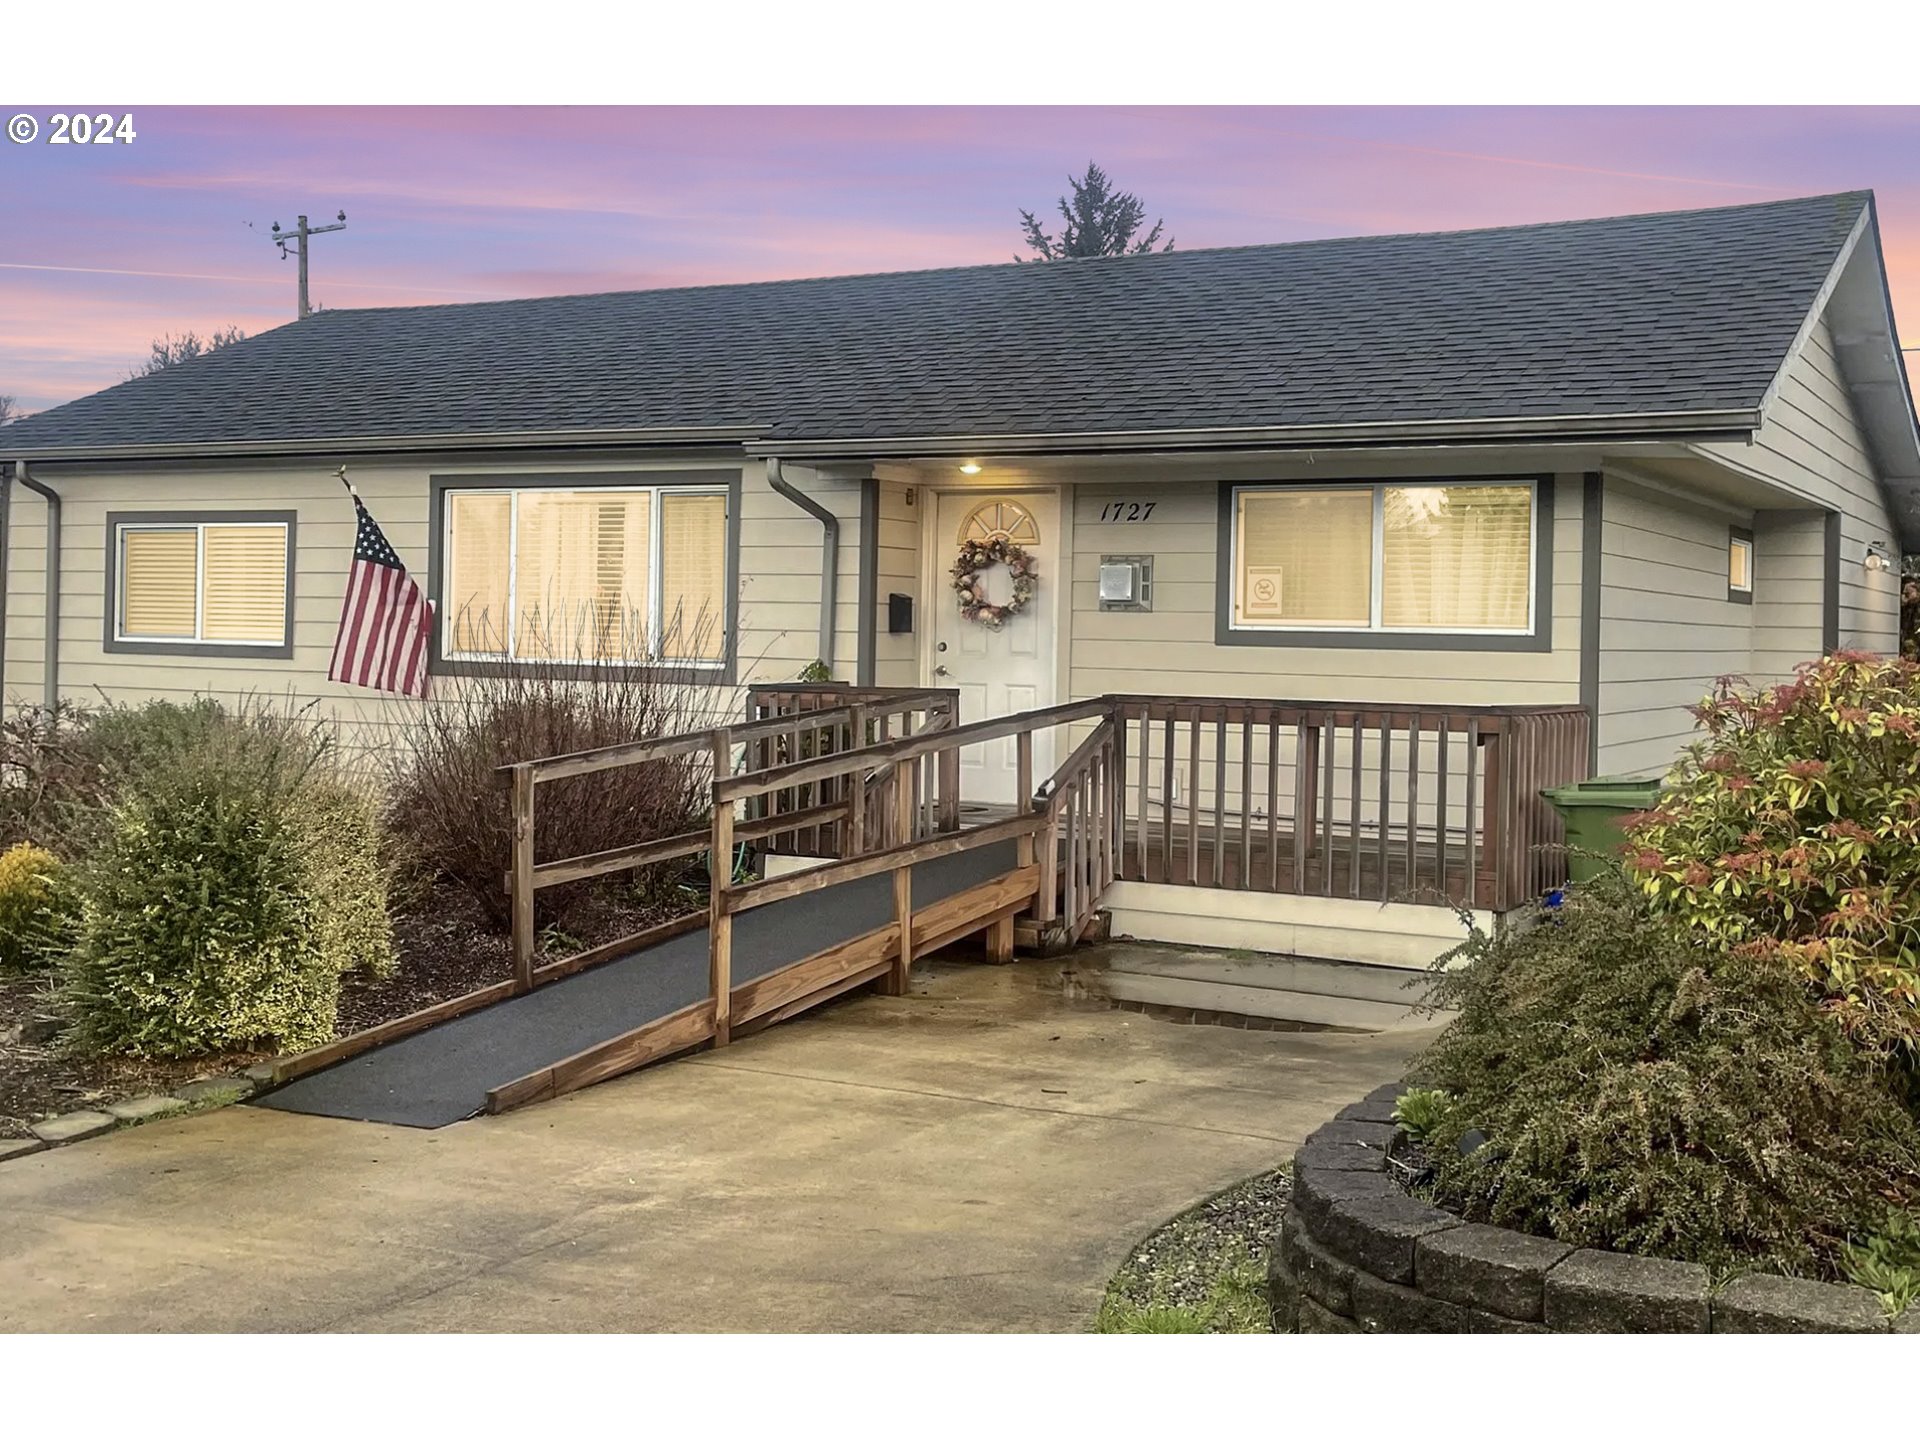 1727 HAYES ST, North Bend, OR 